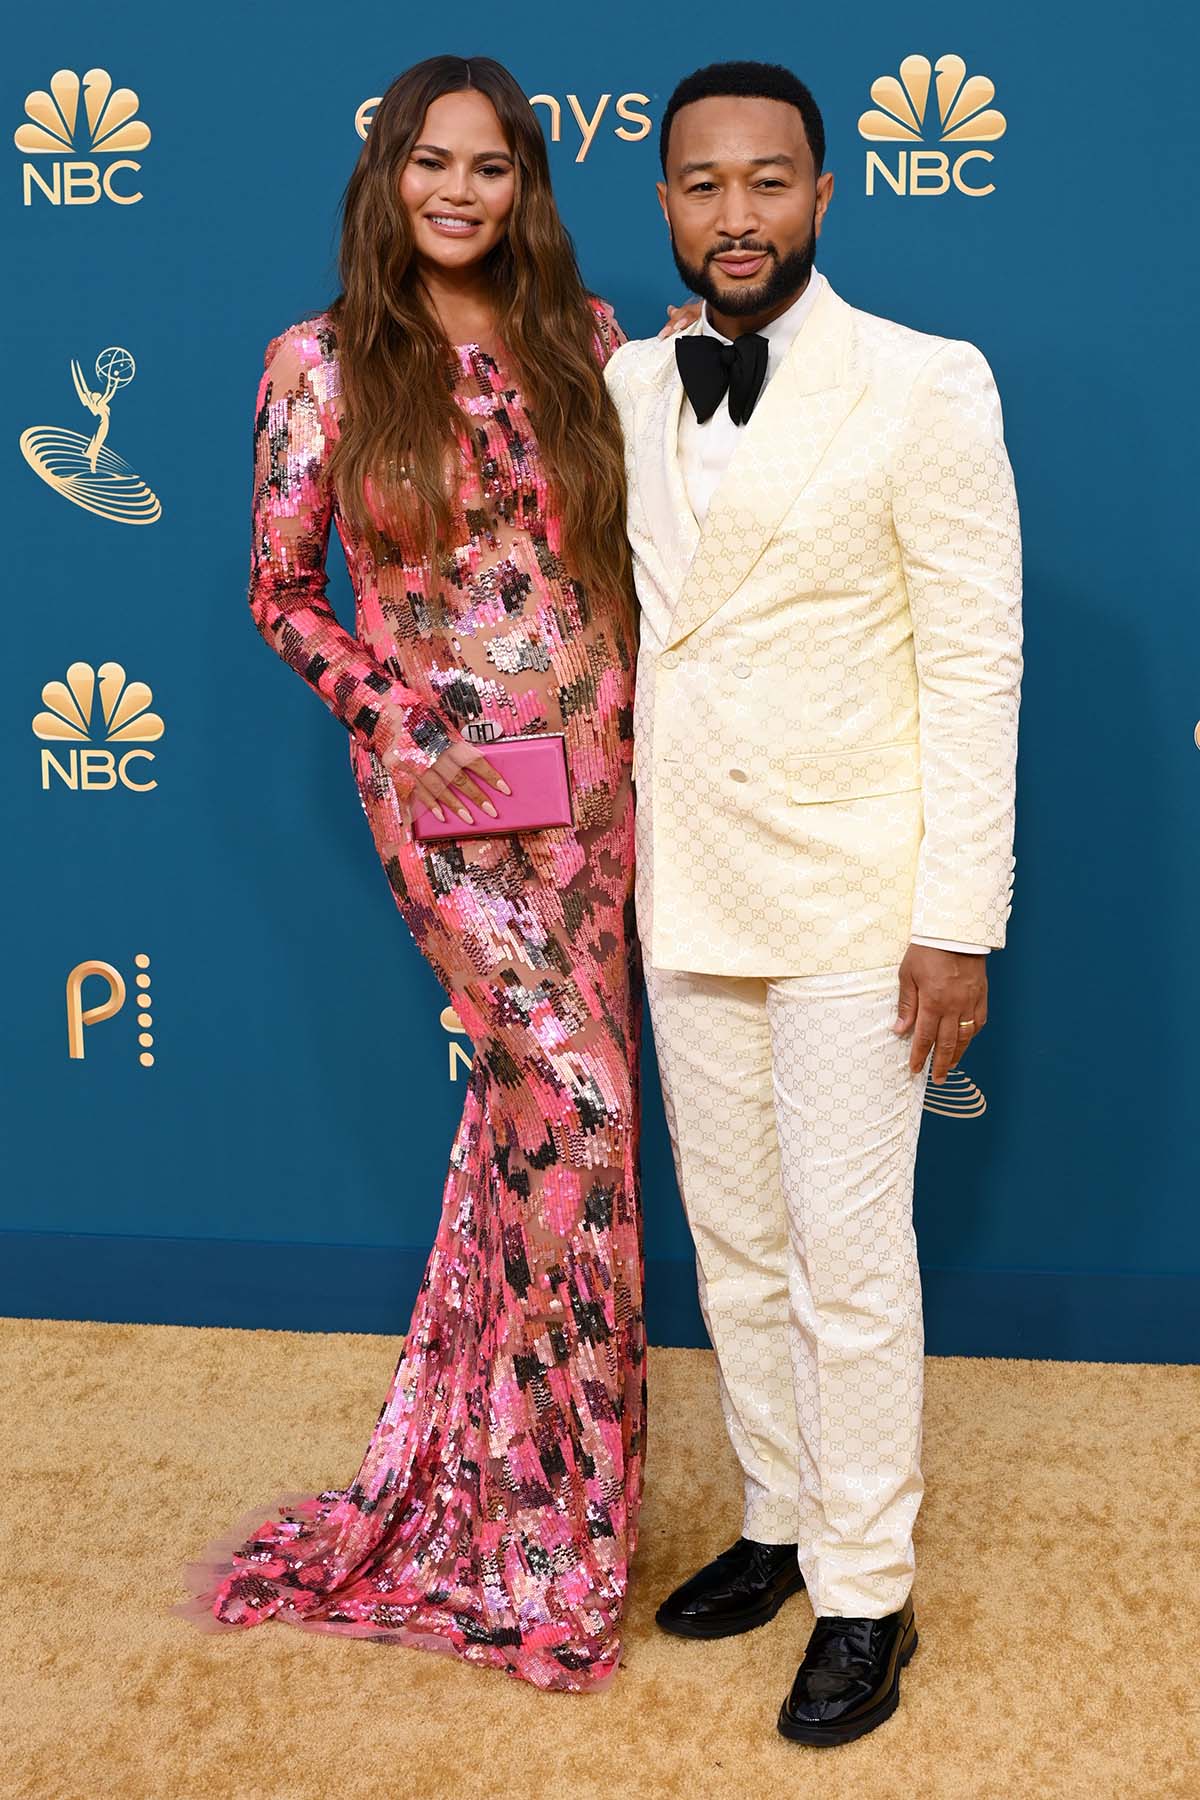 Emmys 2022 Red Carpet Love! Celebrity Couples Heat Up the 2022 Emmys